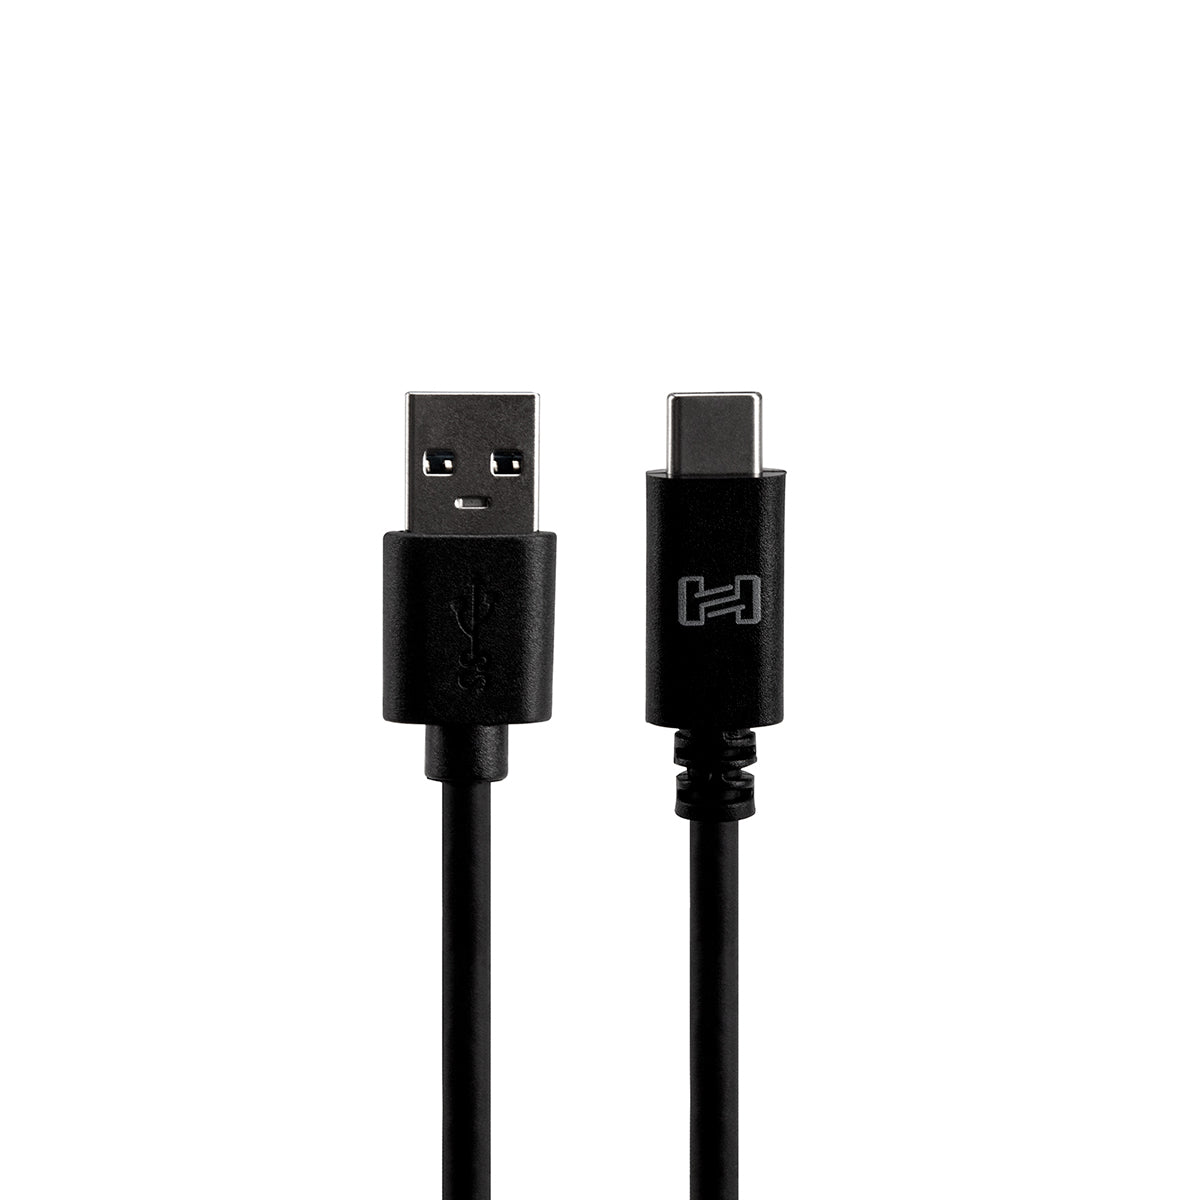 Hosa USB-306CA USB 3.0 type A to C Cable - 6ft, View 1